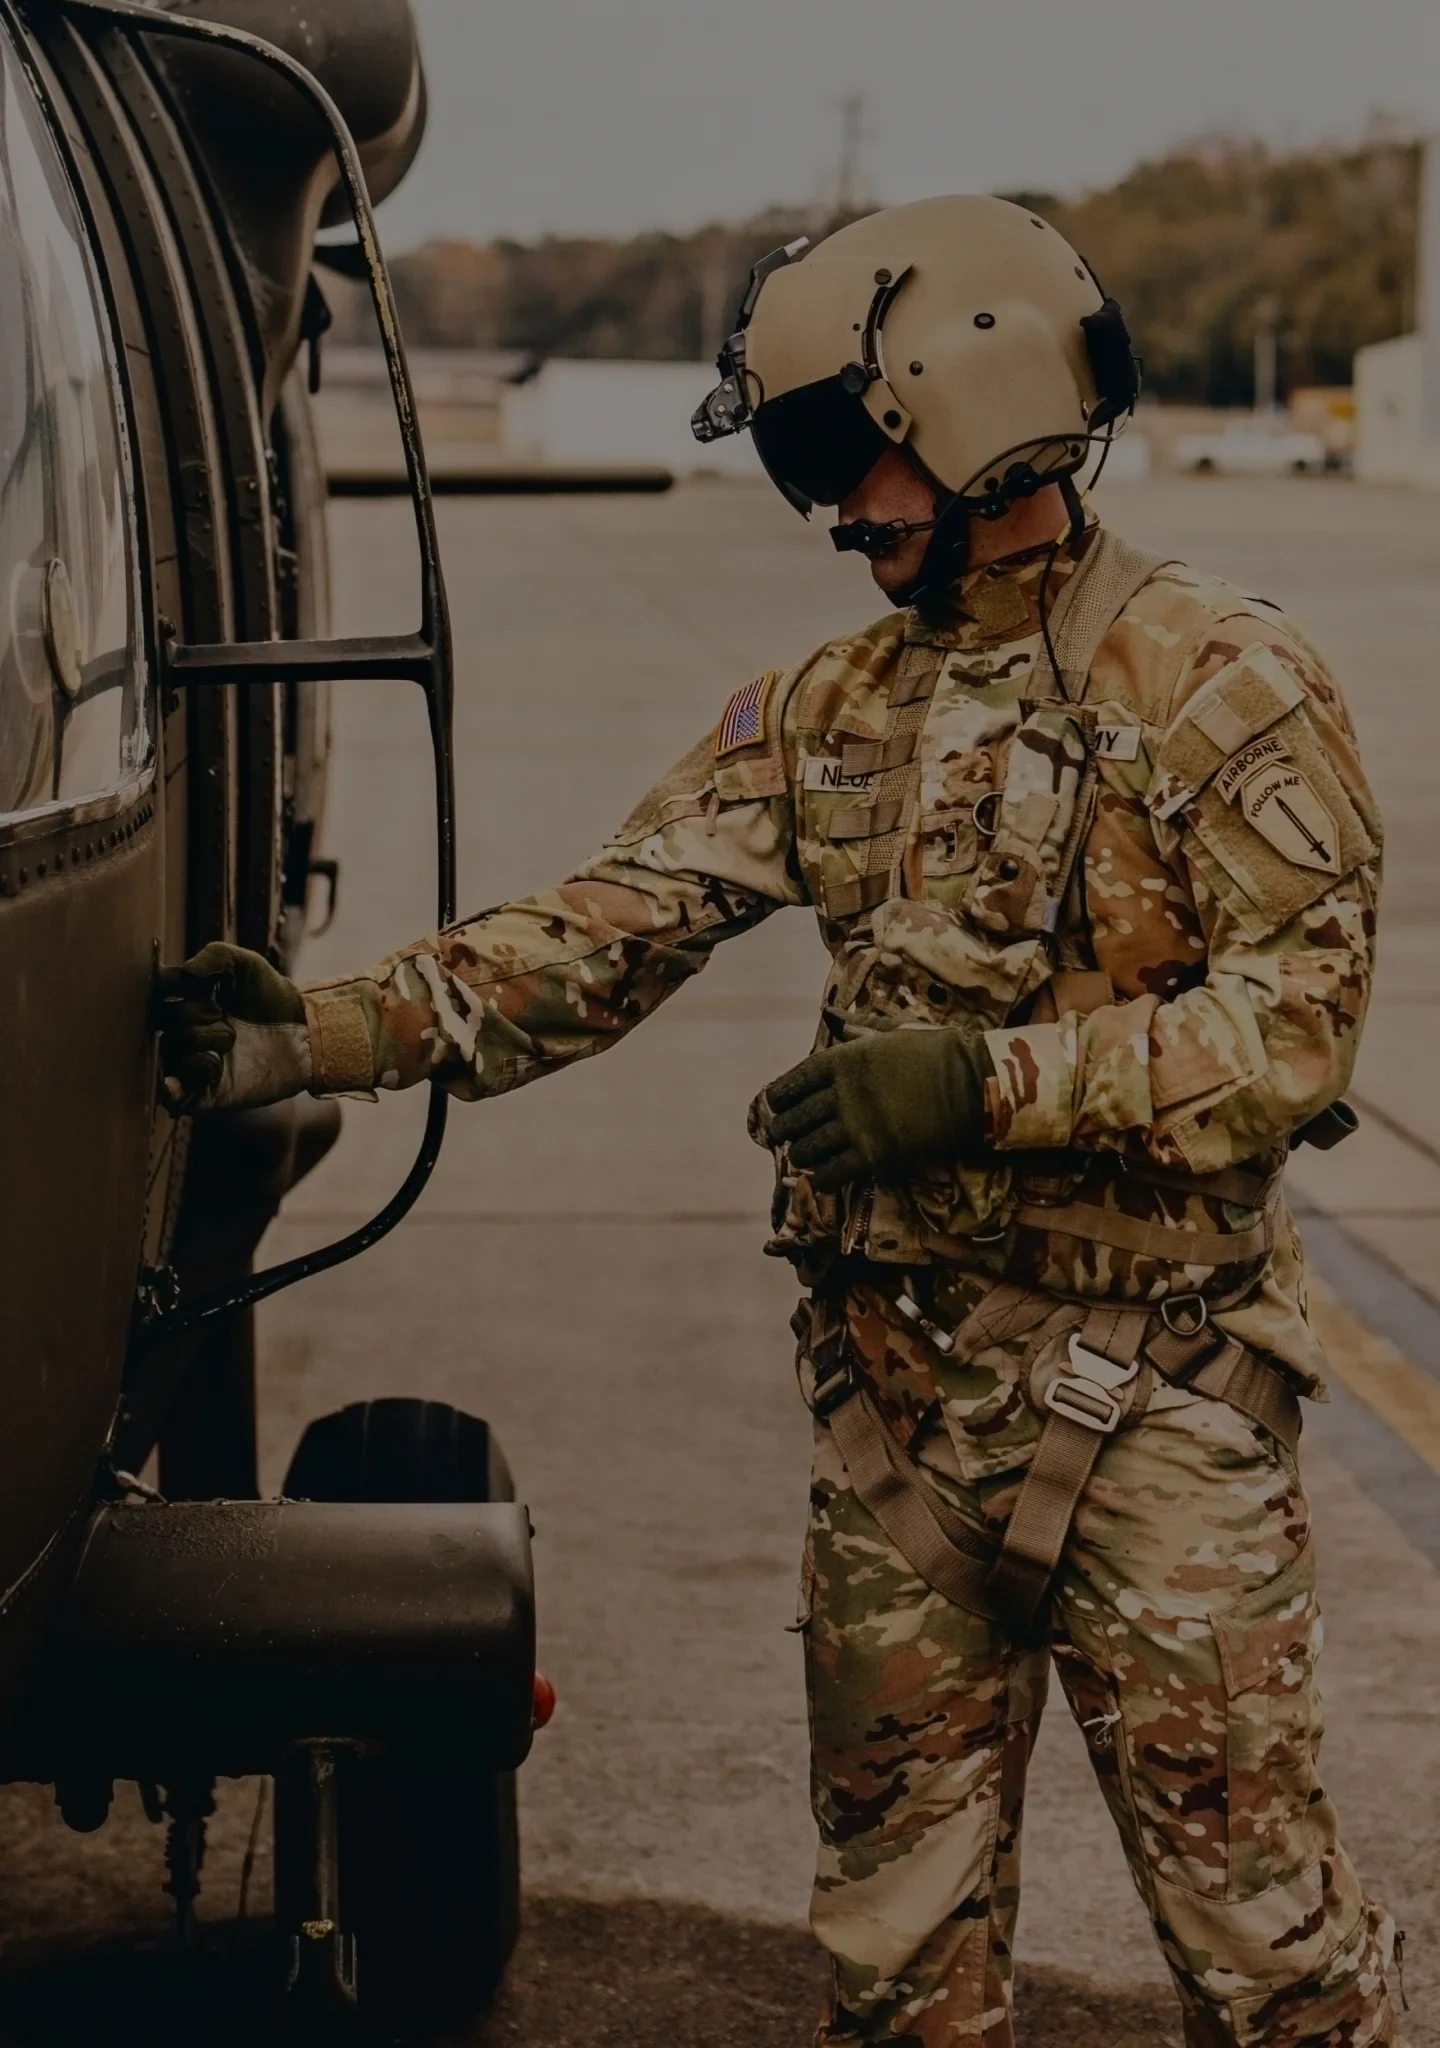 An Army pilot closing the door on a helicopter